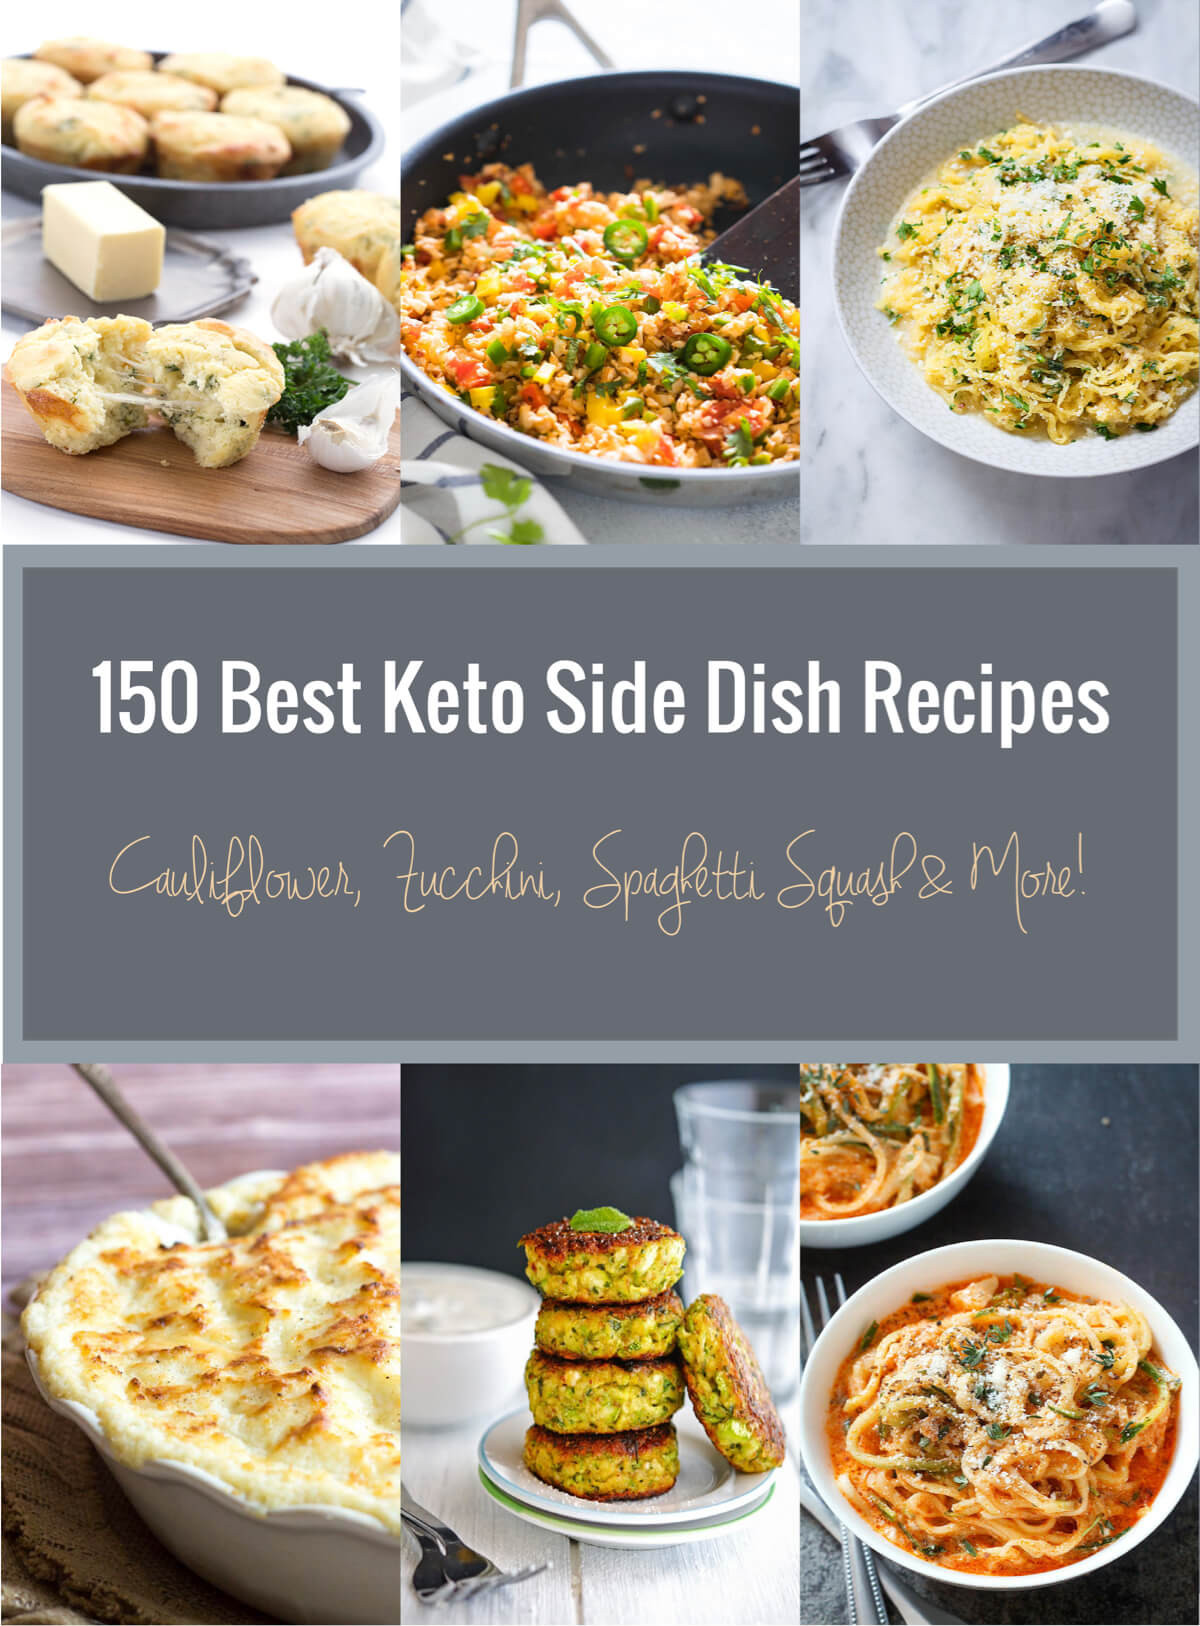 Easy Keto Sides
 150 Best Keto Side Dish Recipes Low Carb